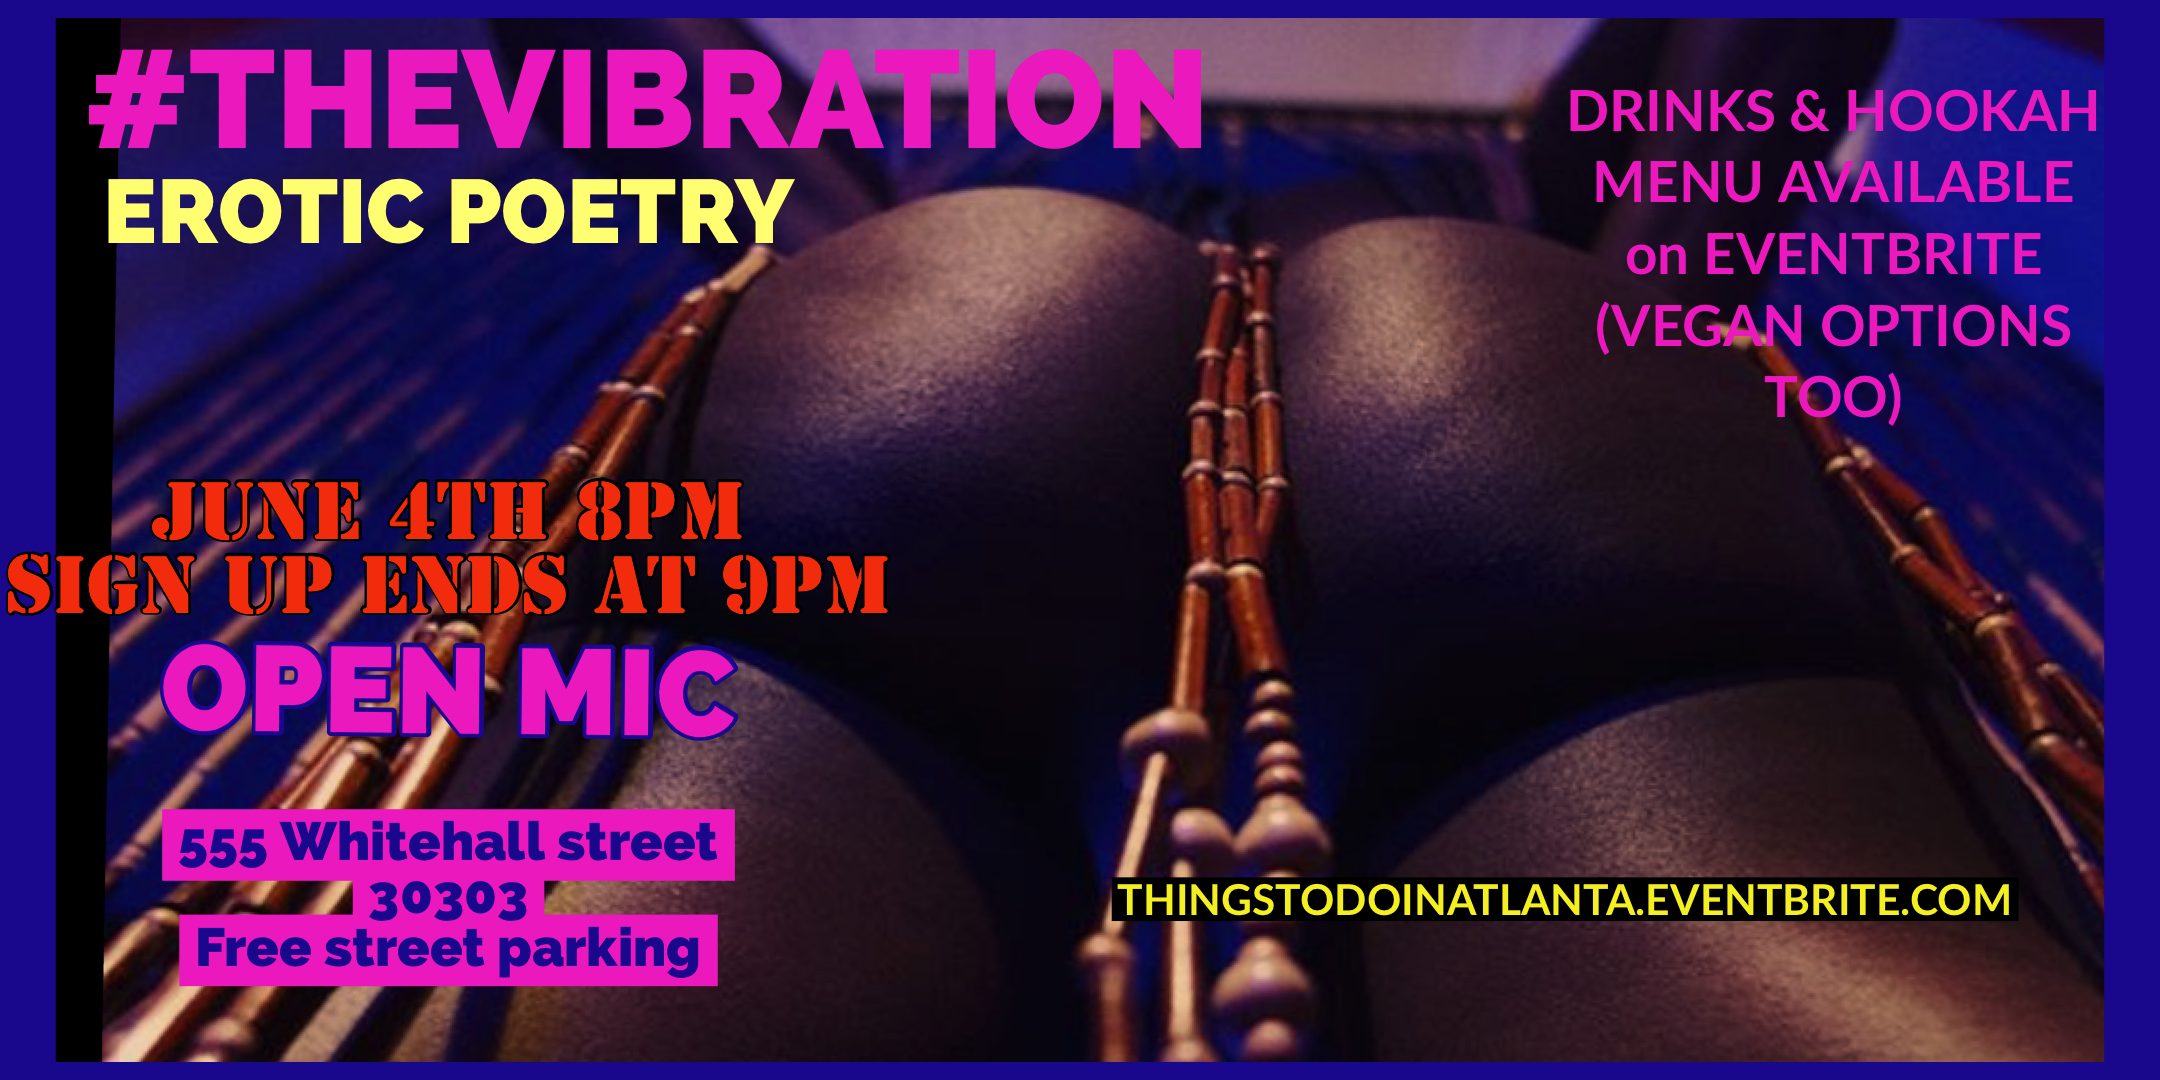 THE NAKED HUSTLE SHOW PRESENTS: THE VIBRATION